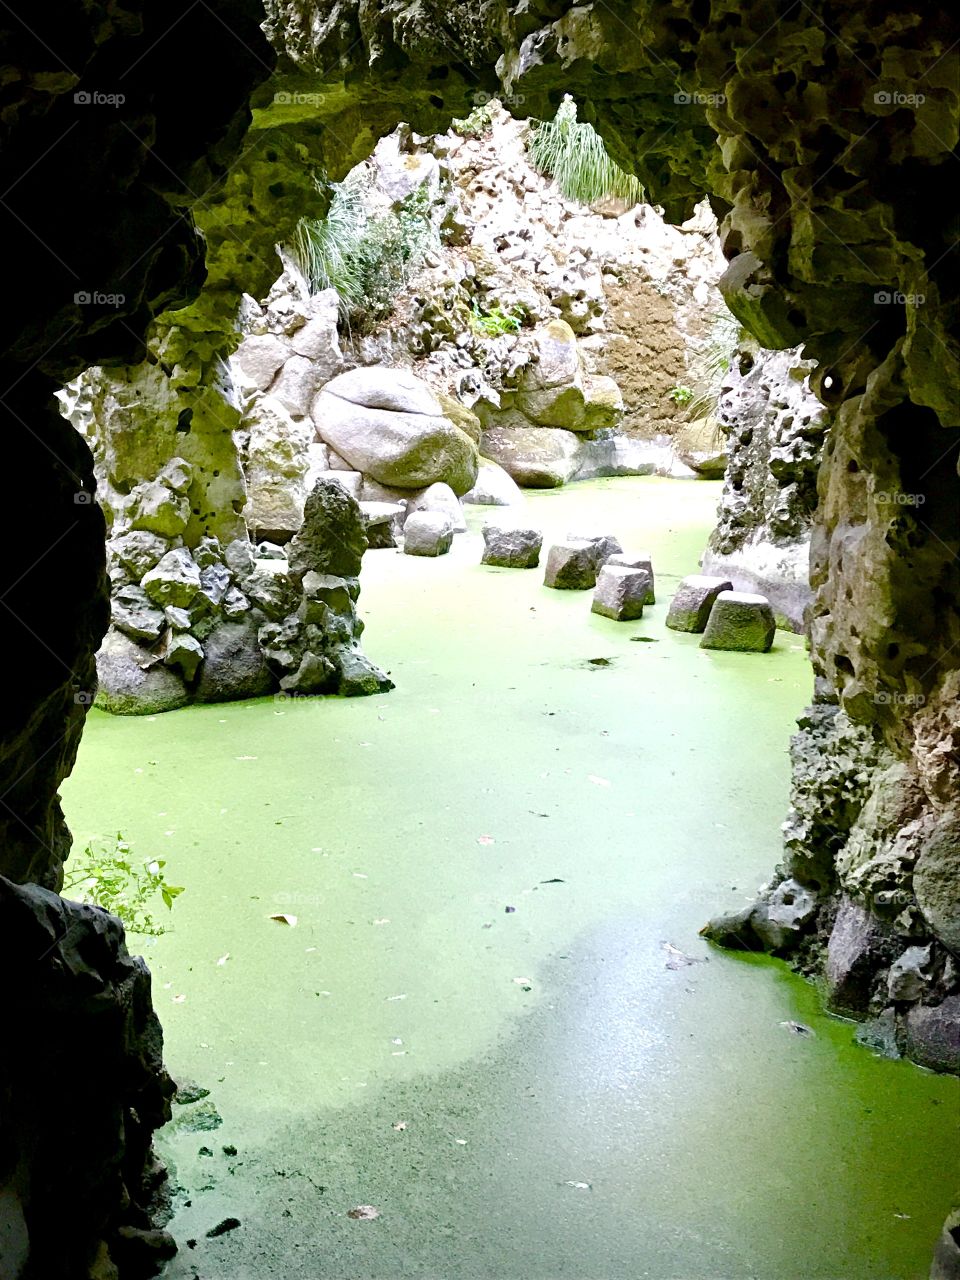 Pond in a cave in Sintra palace garden